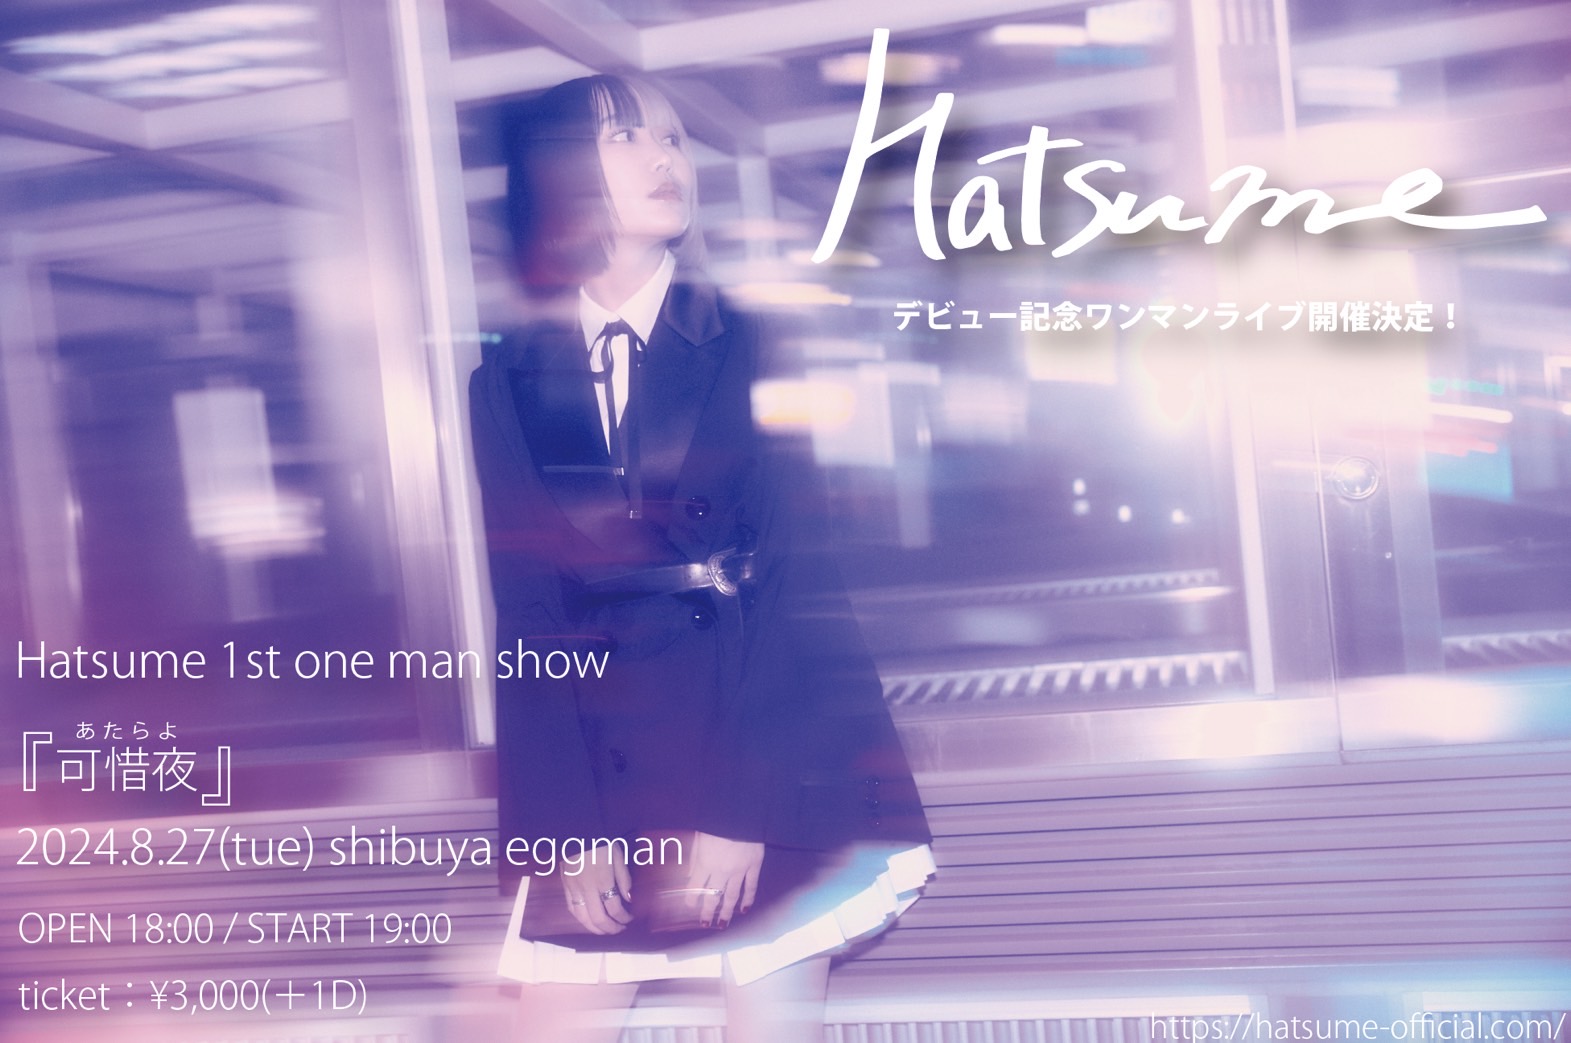 Hatsume 1st one man show